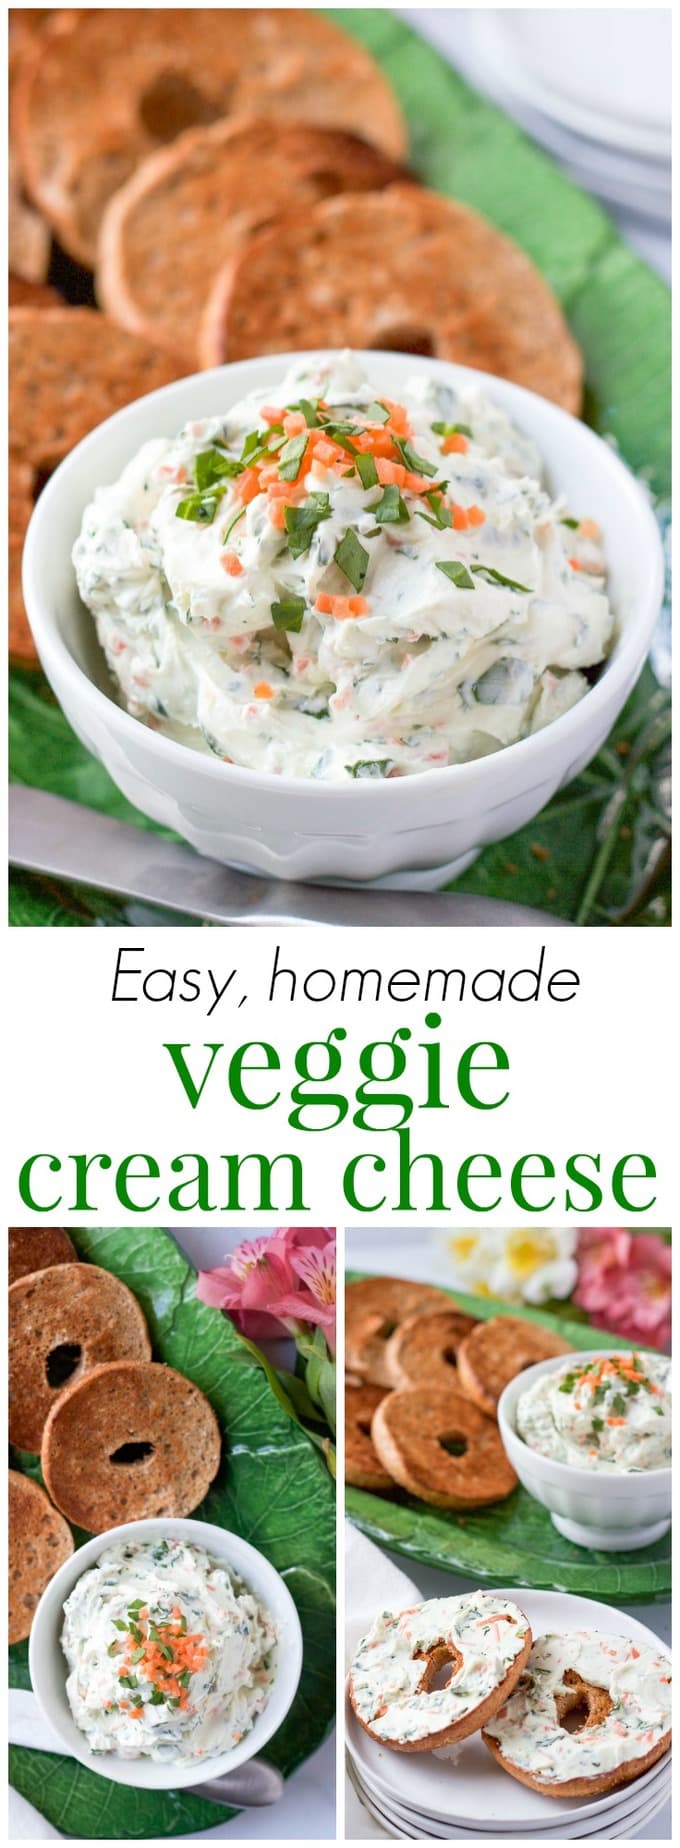 A collage of photos featuring homemade veggie cream cheese with a text box in the middle